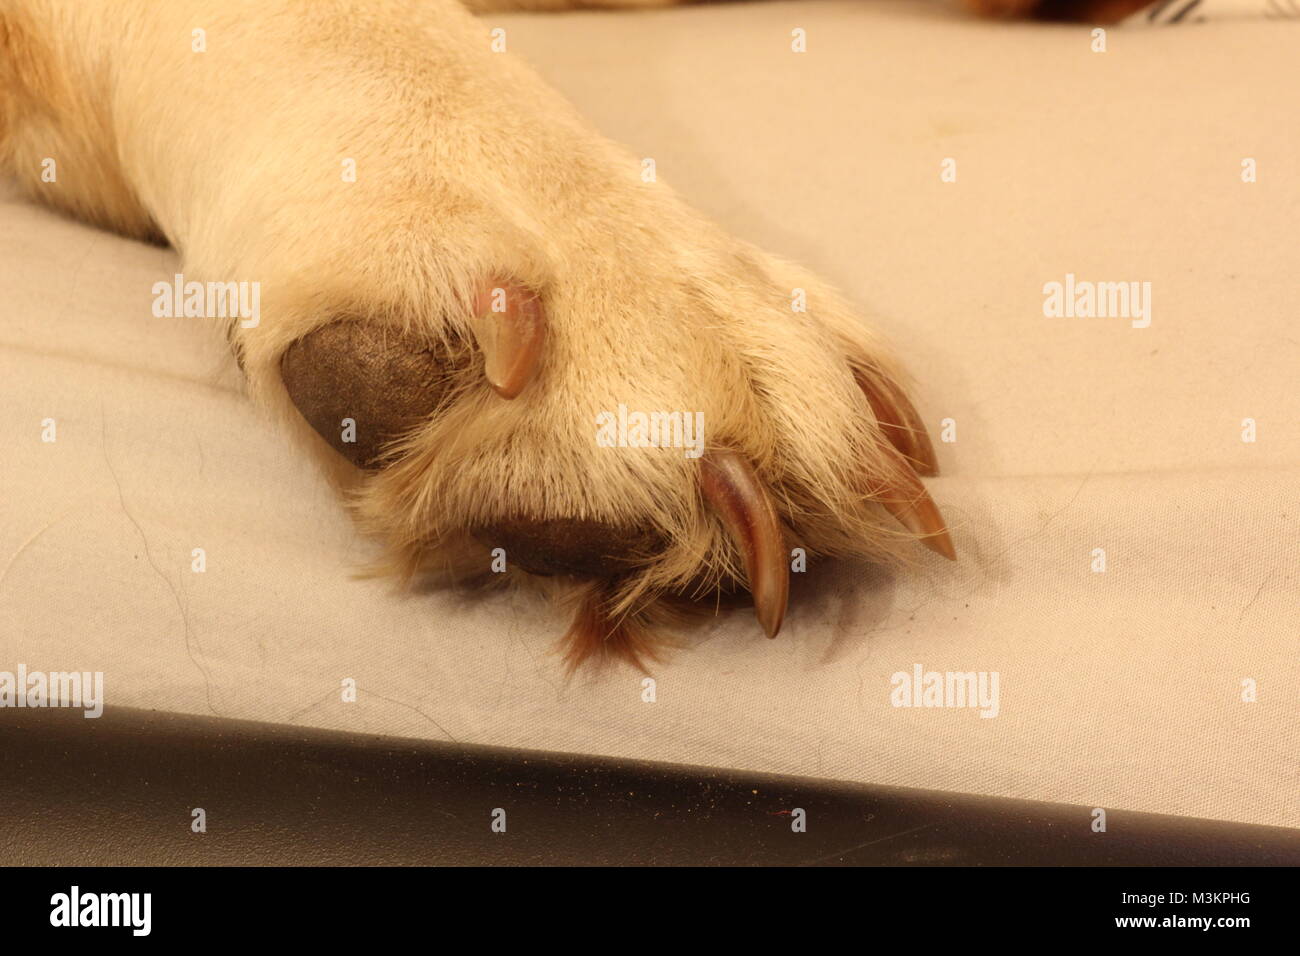 Labrador Feet High Stock Photography and Images - Alamy